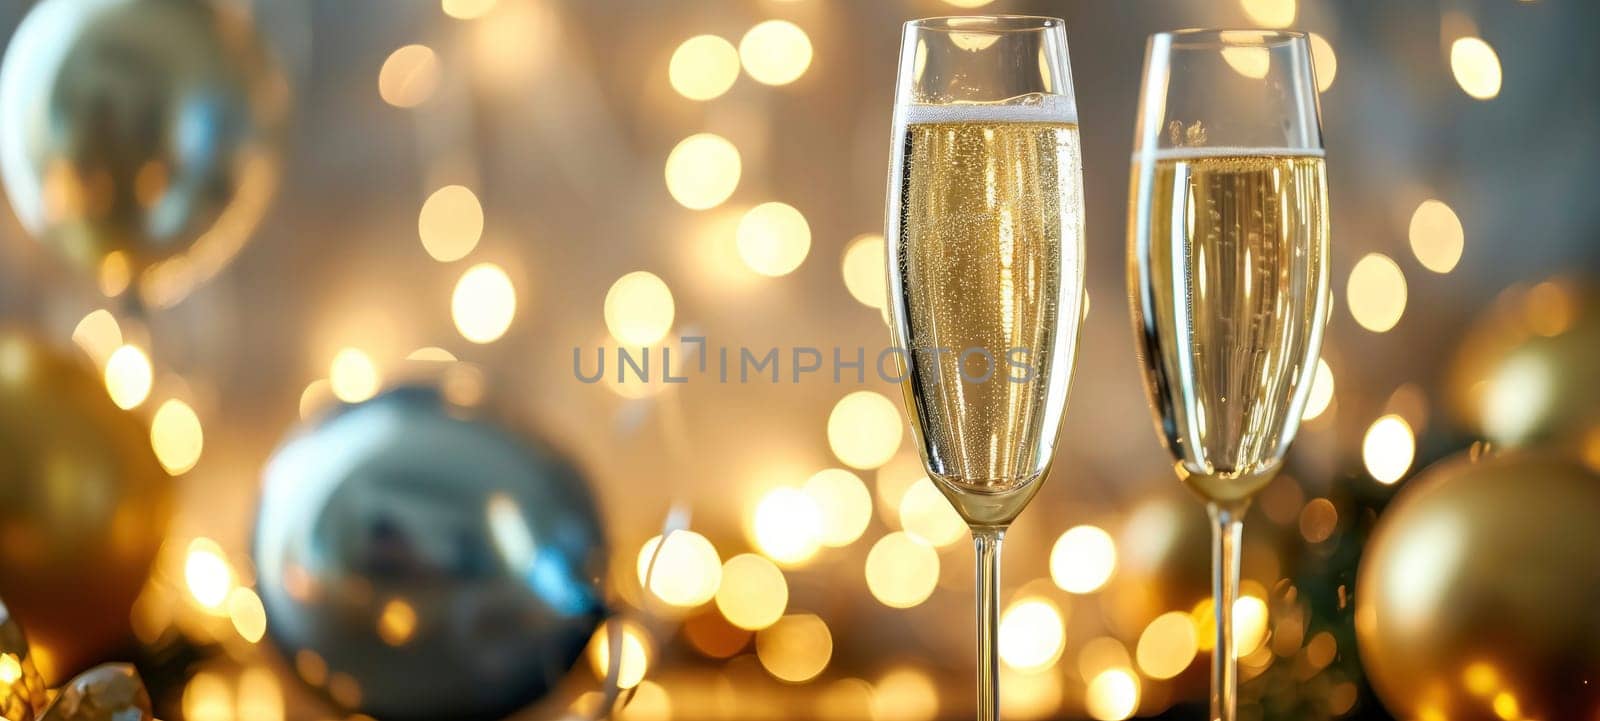 Two champagne glasses in a festive setting with golden bokeh lights and elegant decorations, embodying celebration and luxury.